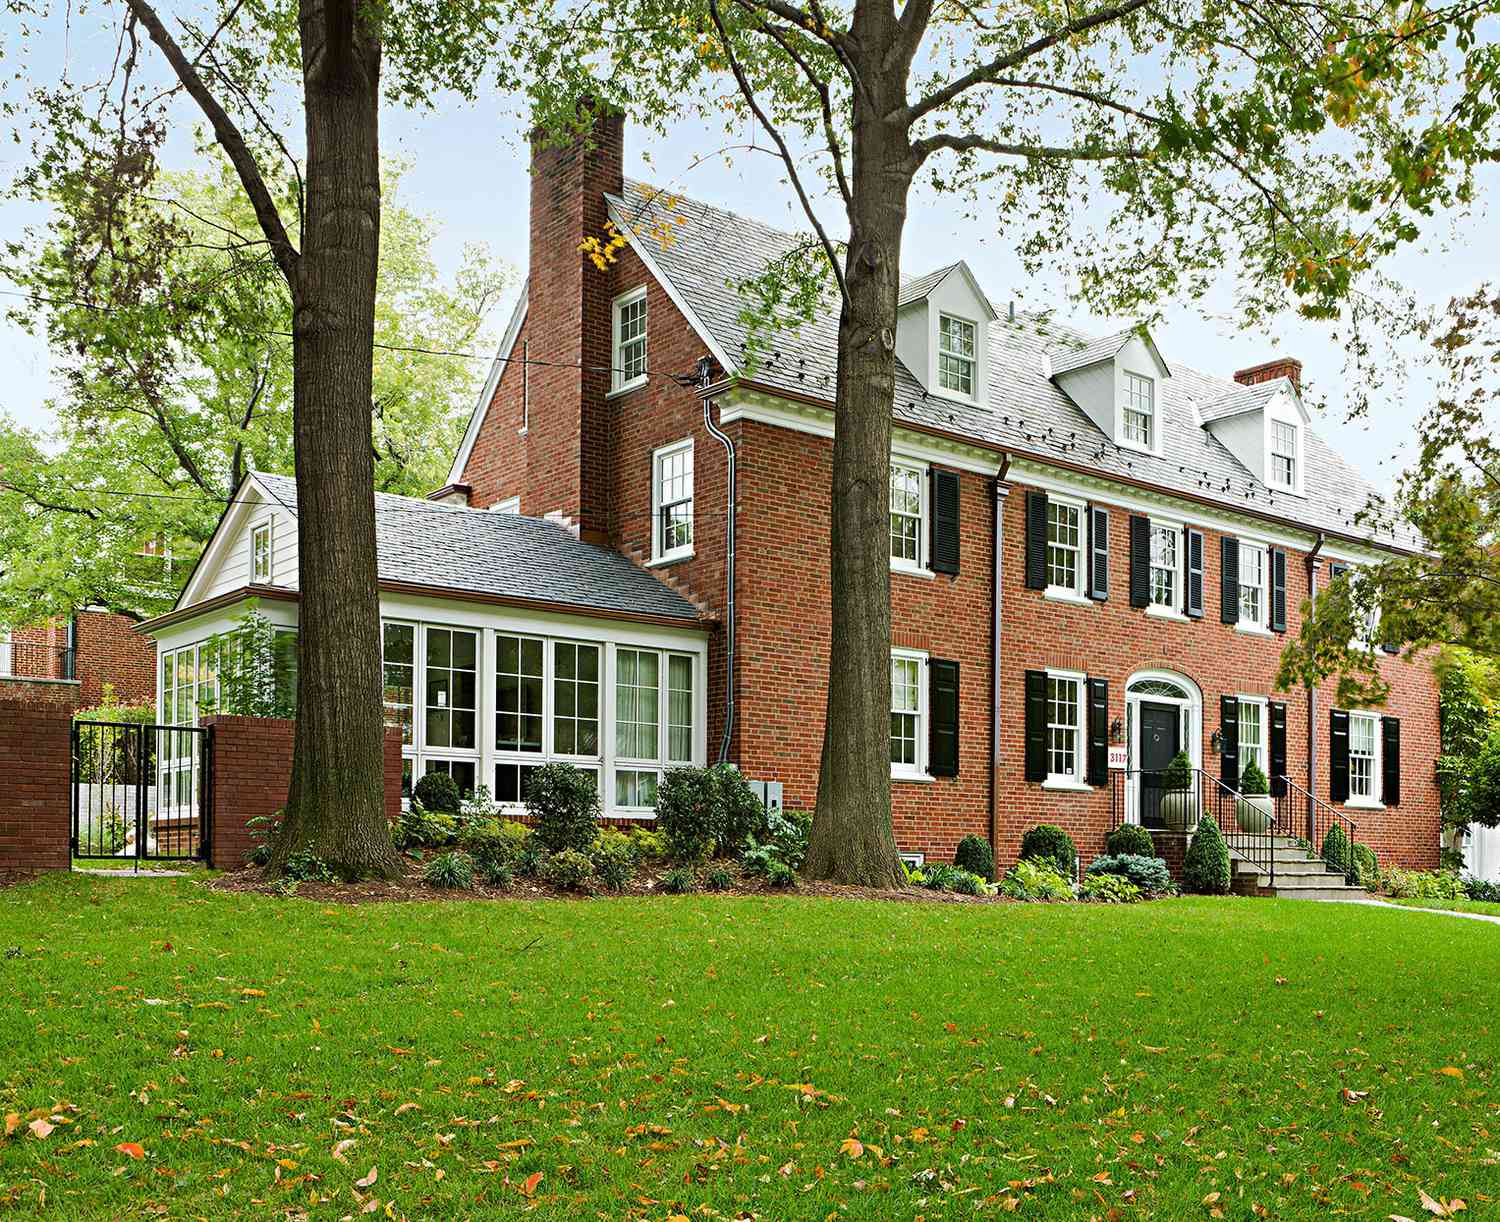 brick colonial style home